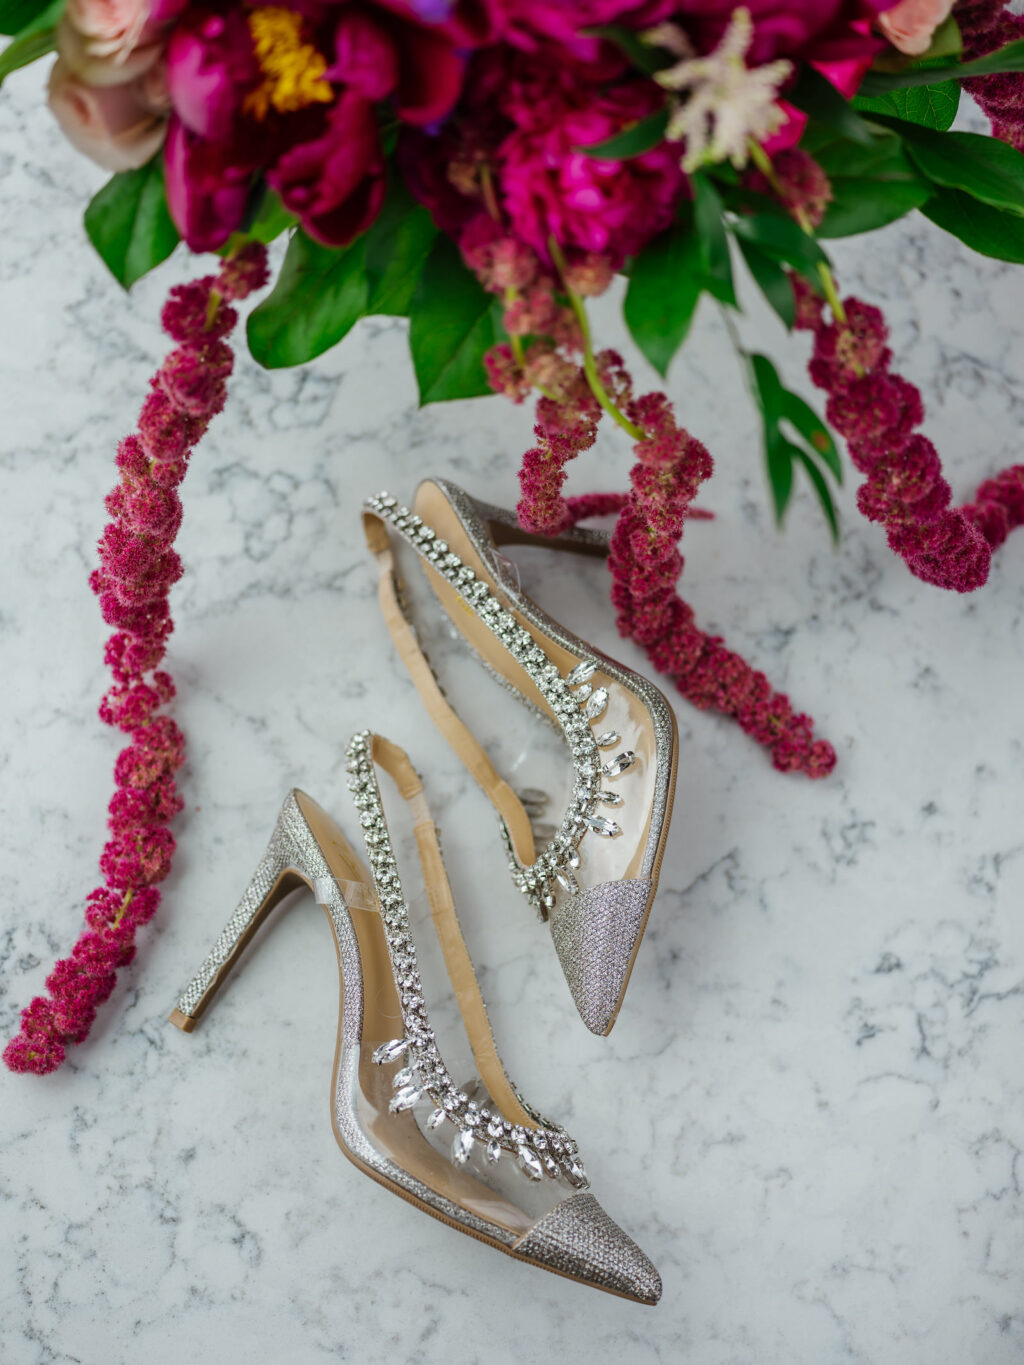 Silver Pointed Toe and Clear See Through and Rhinestone Bridal Wedding Shoes, Pink Amaranthus | Tampa Bay Wedding Florist Iza's Flowers